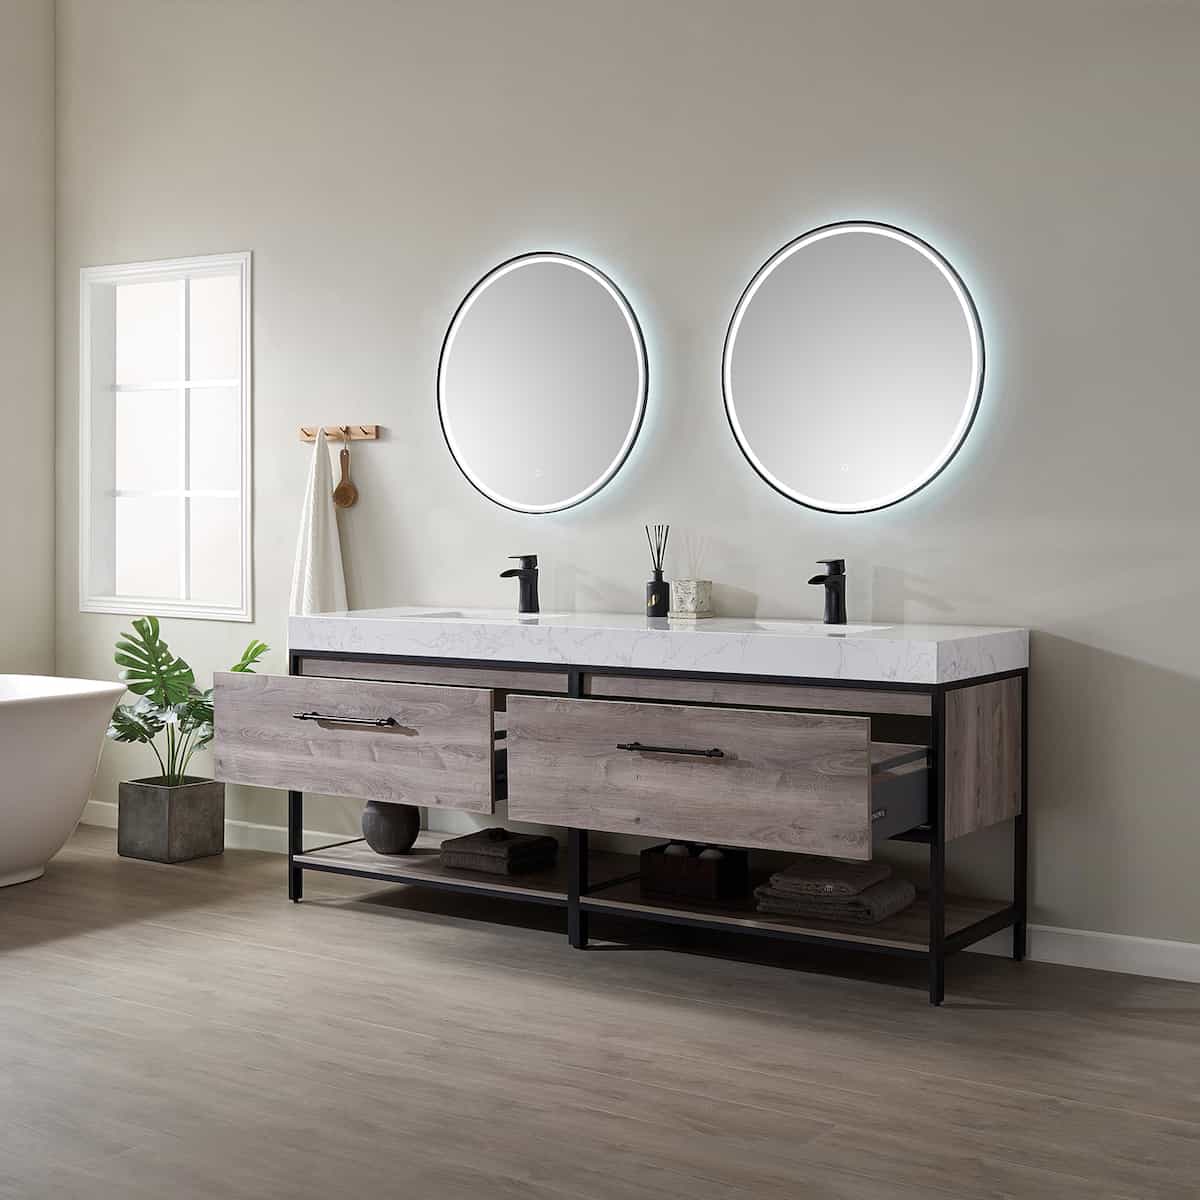 Vinnova Palma 84 Inch Freestanding Double Vanity in Mexican Oak with White Composite Grain Stone Countertop With Mirrors Drawers 701284-MXO-GW